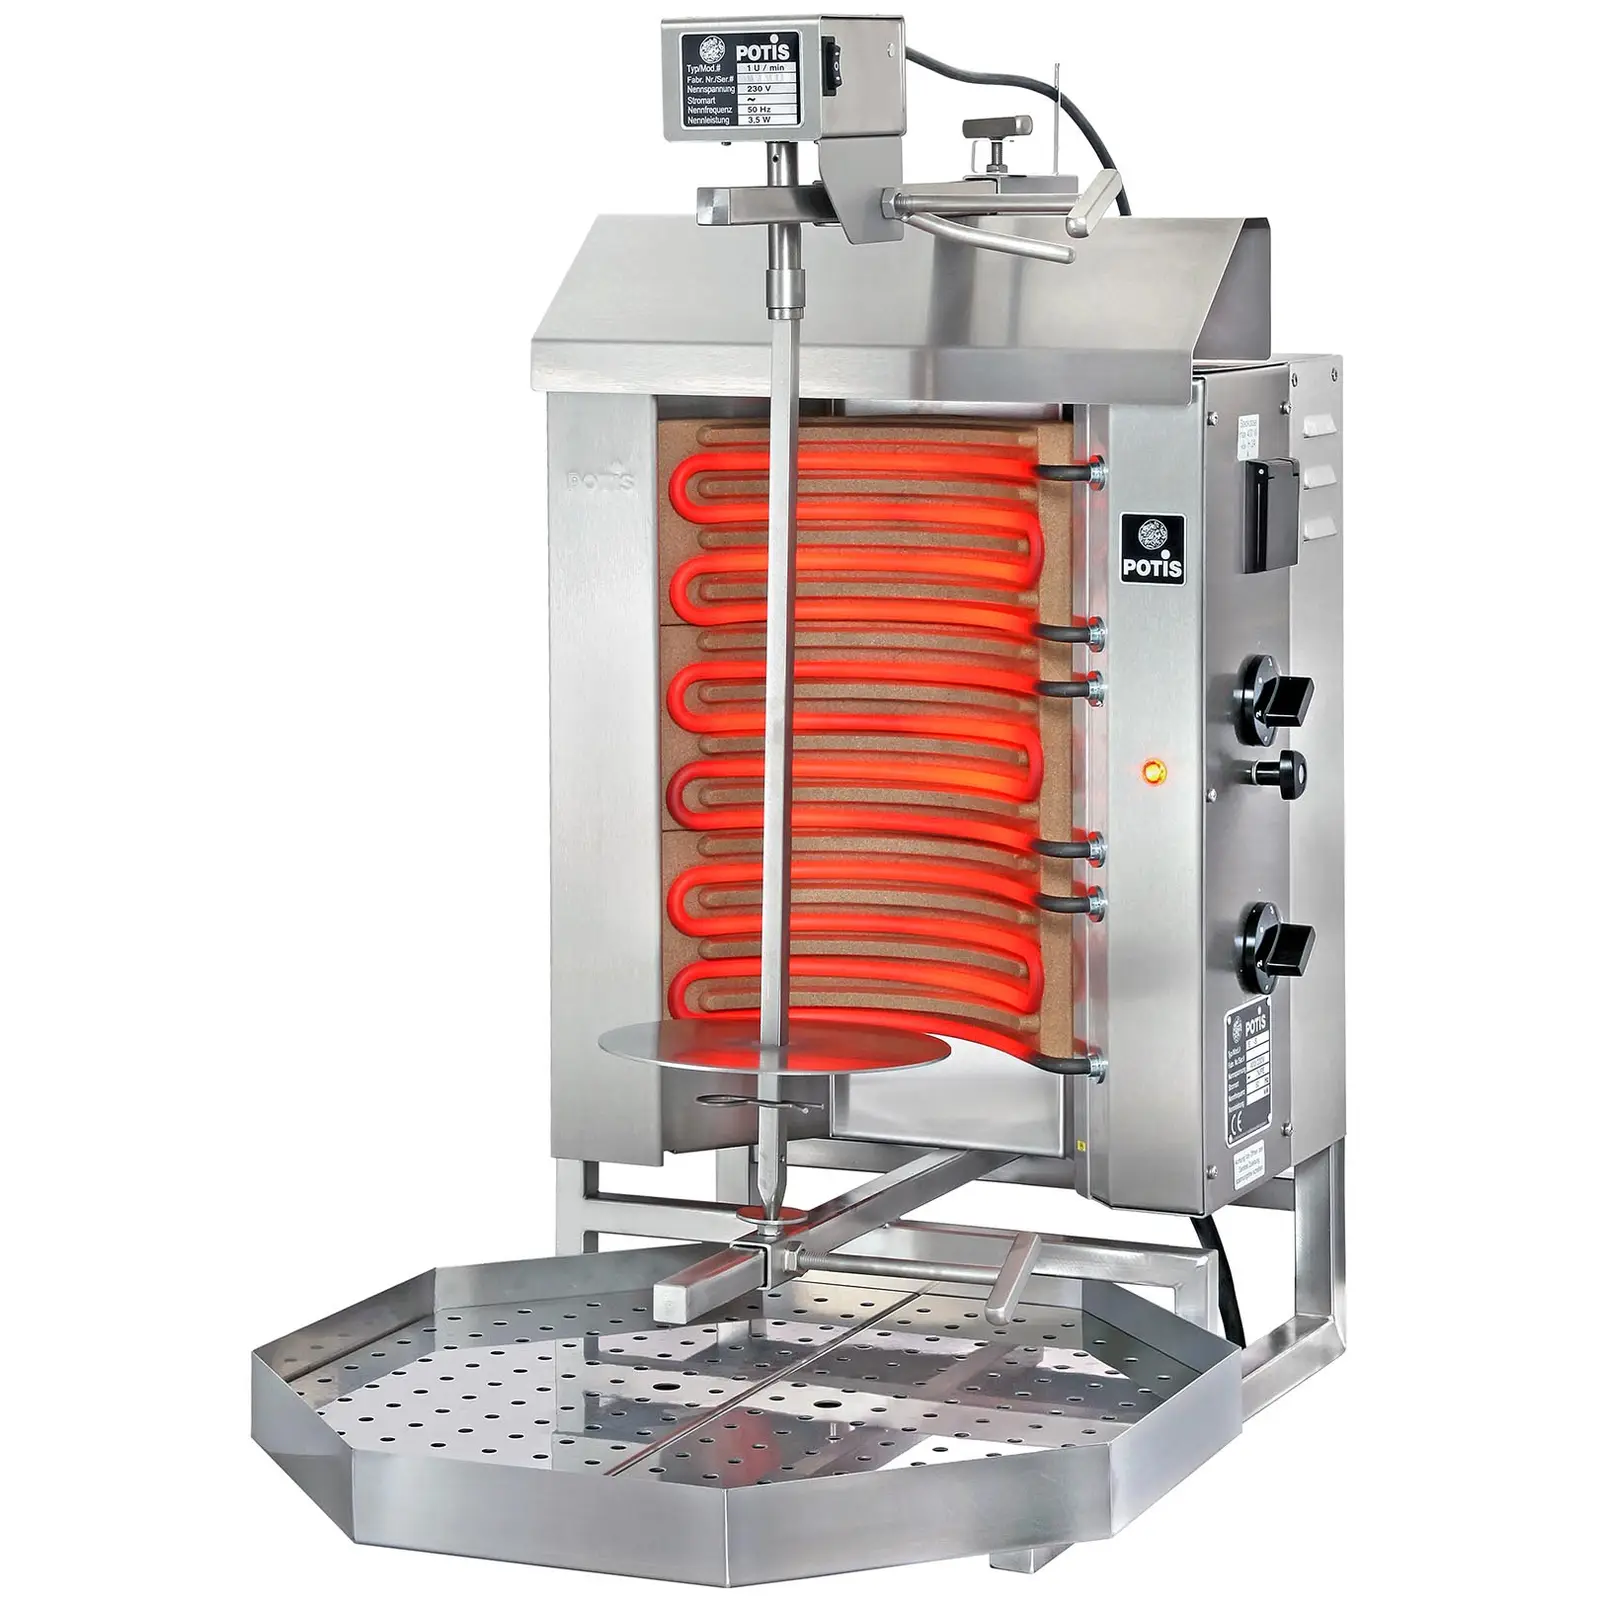 Factory second Kebab Grill - 4500 W - up to 15 kg of meat